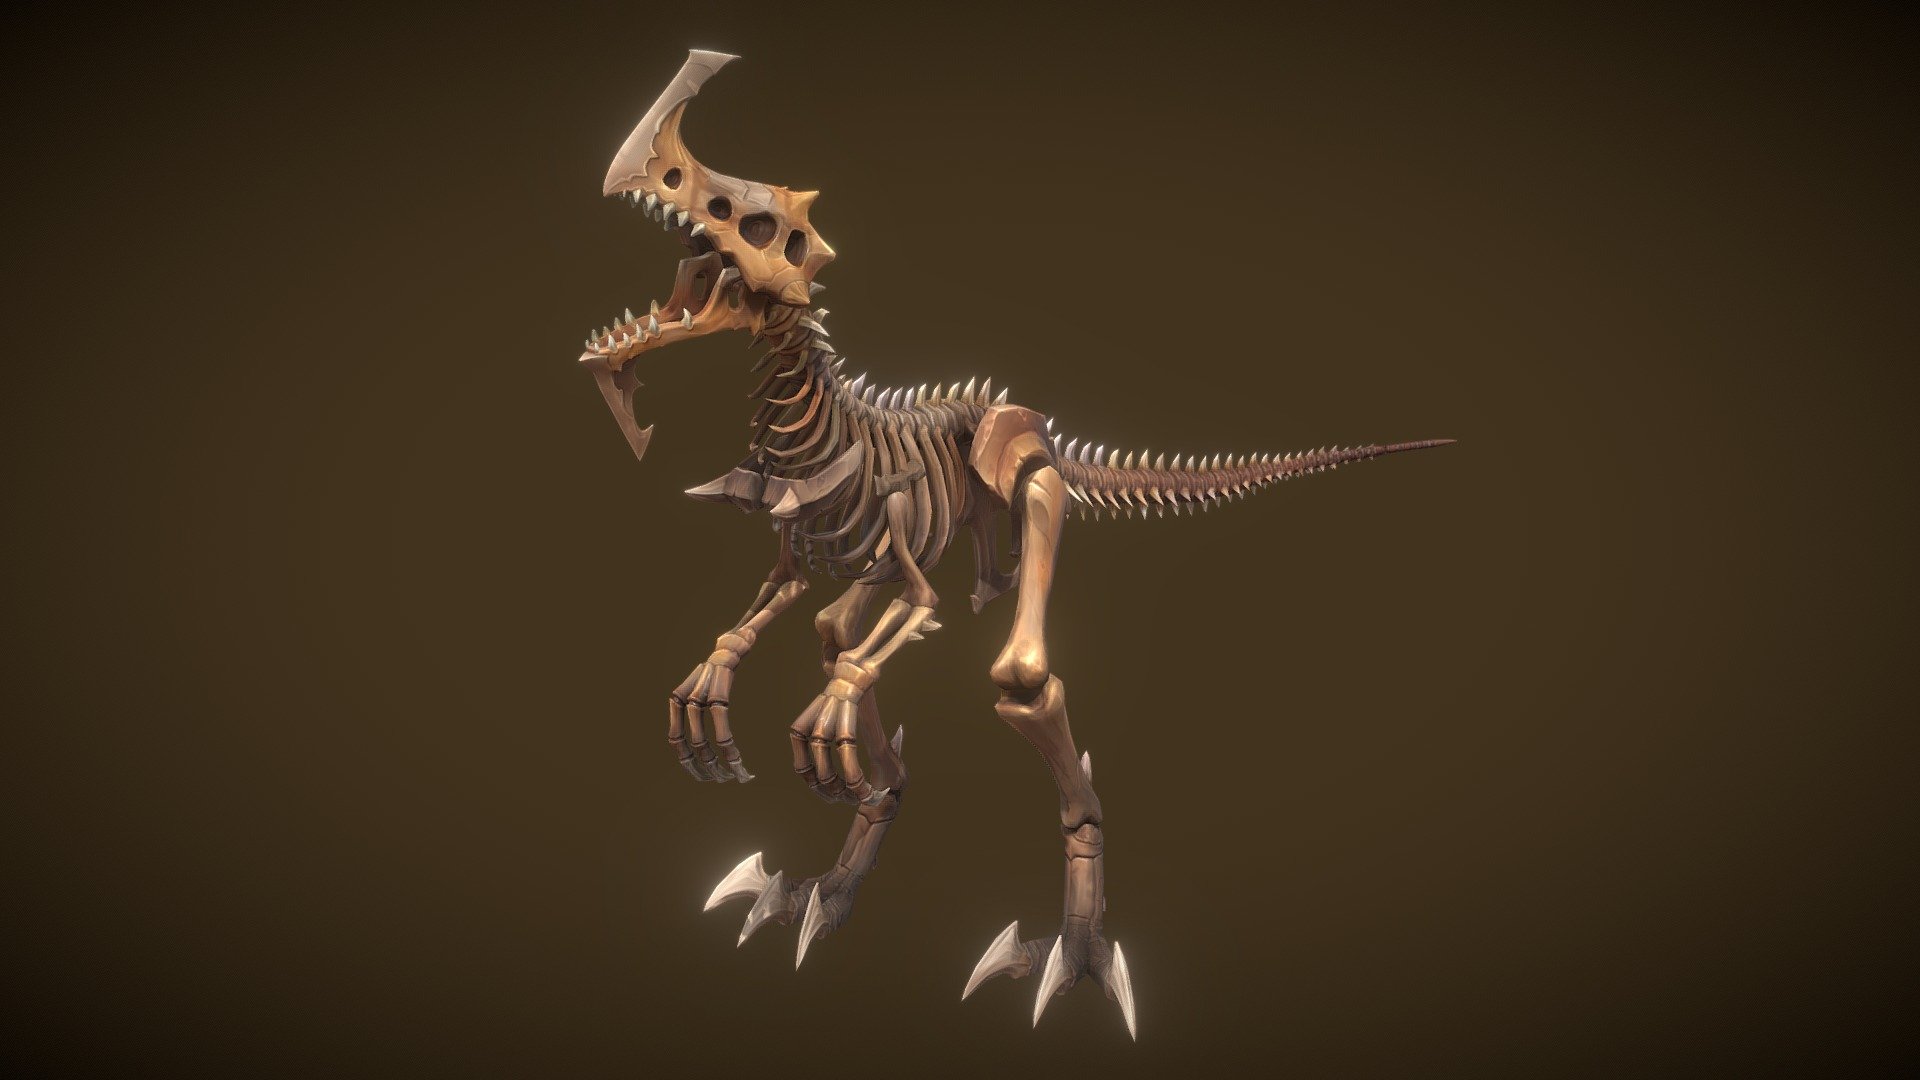 Stylized character for a project.

Software used: Zbrush, Autodesk Maya, Autodesk 3ds Max, Substance Painter - Stylized Fantasy Skeletal Dinosaur (Creature) - 3D model by N-hance Studio (@Malice6731) 3d model